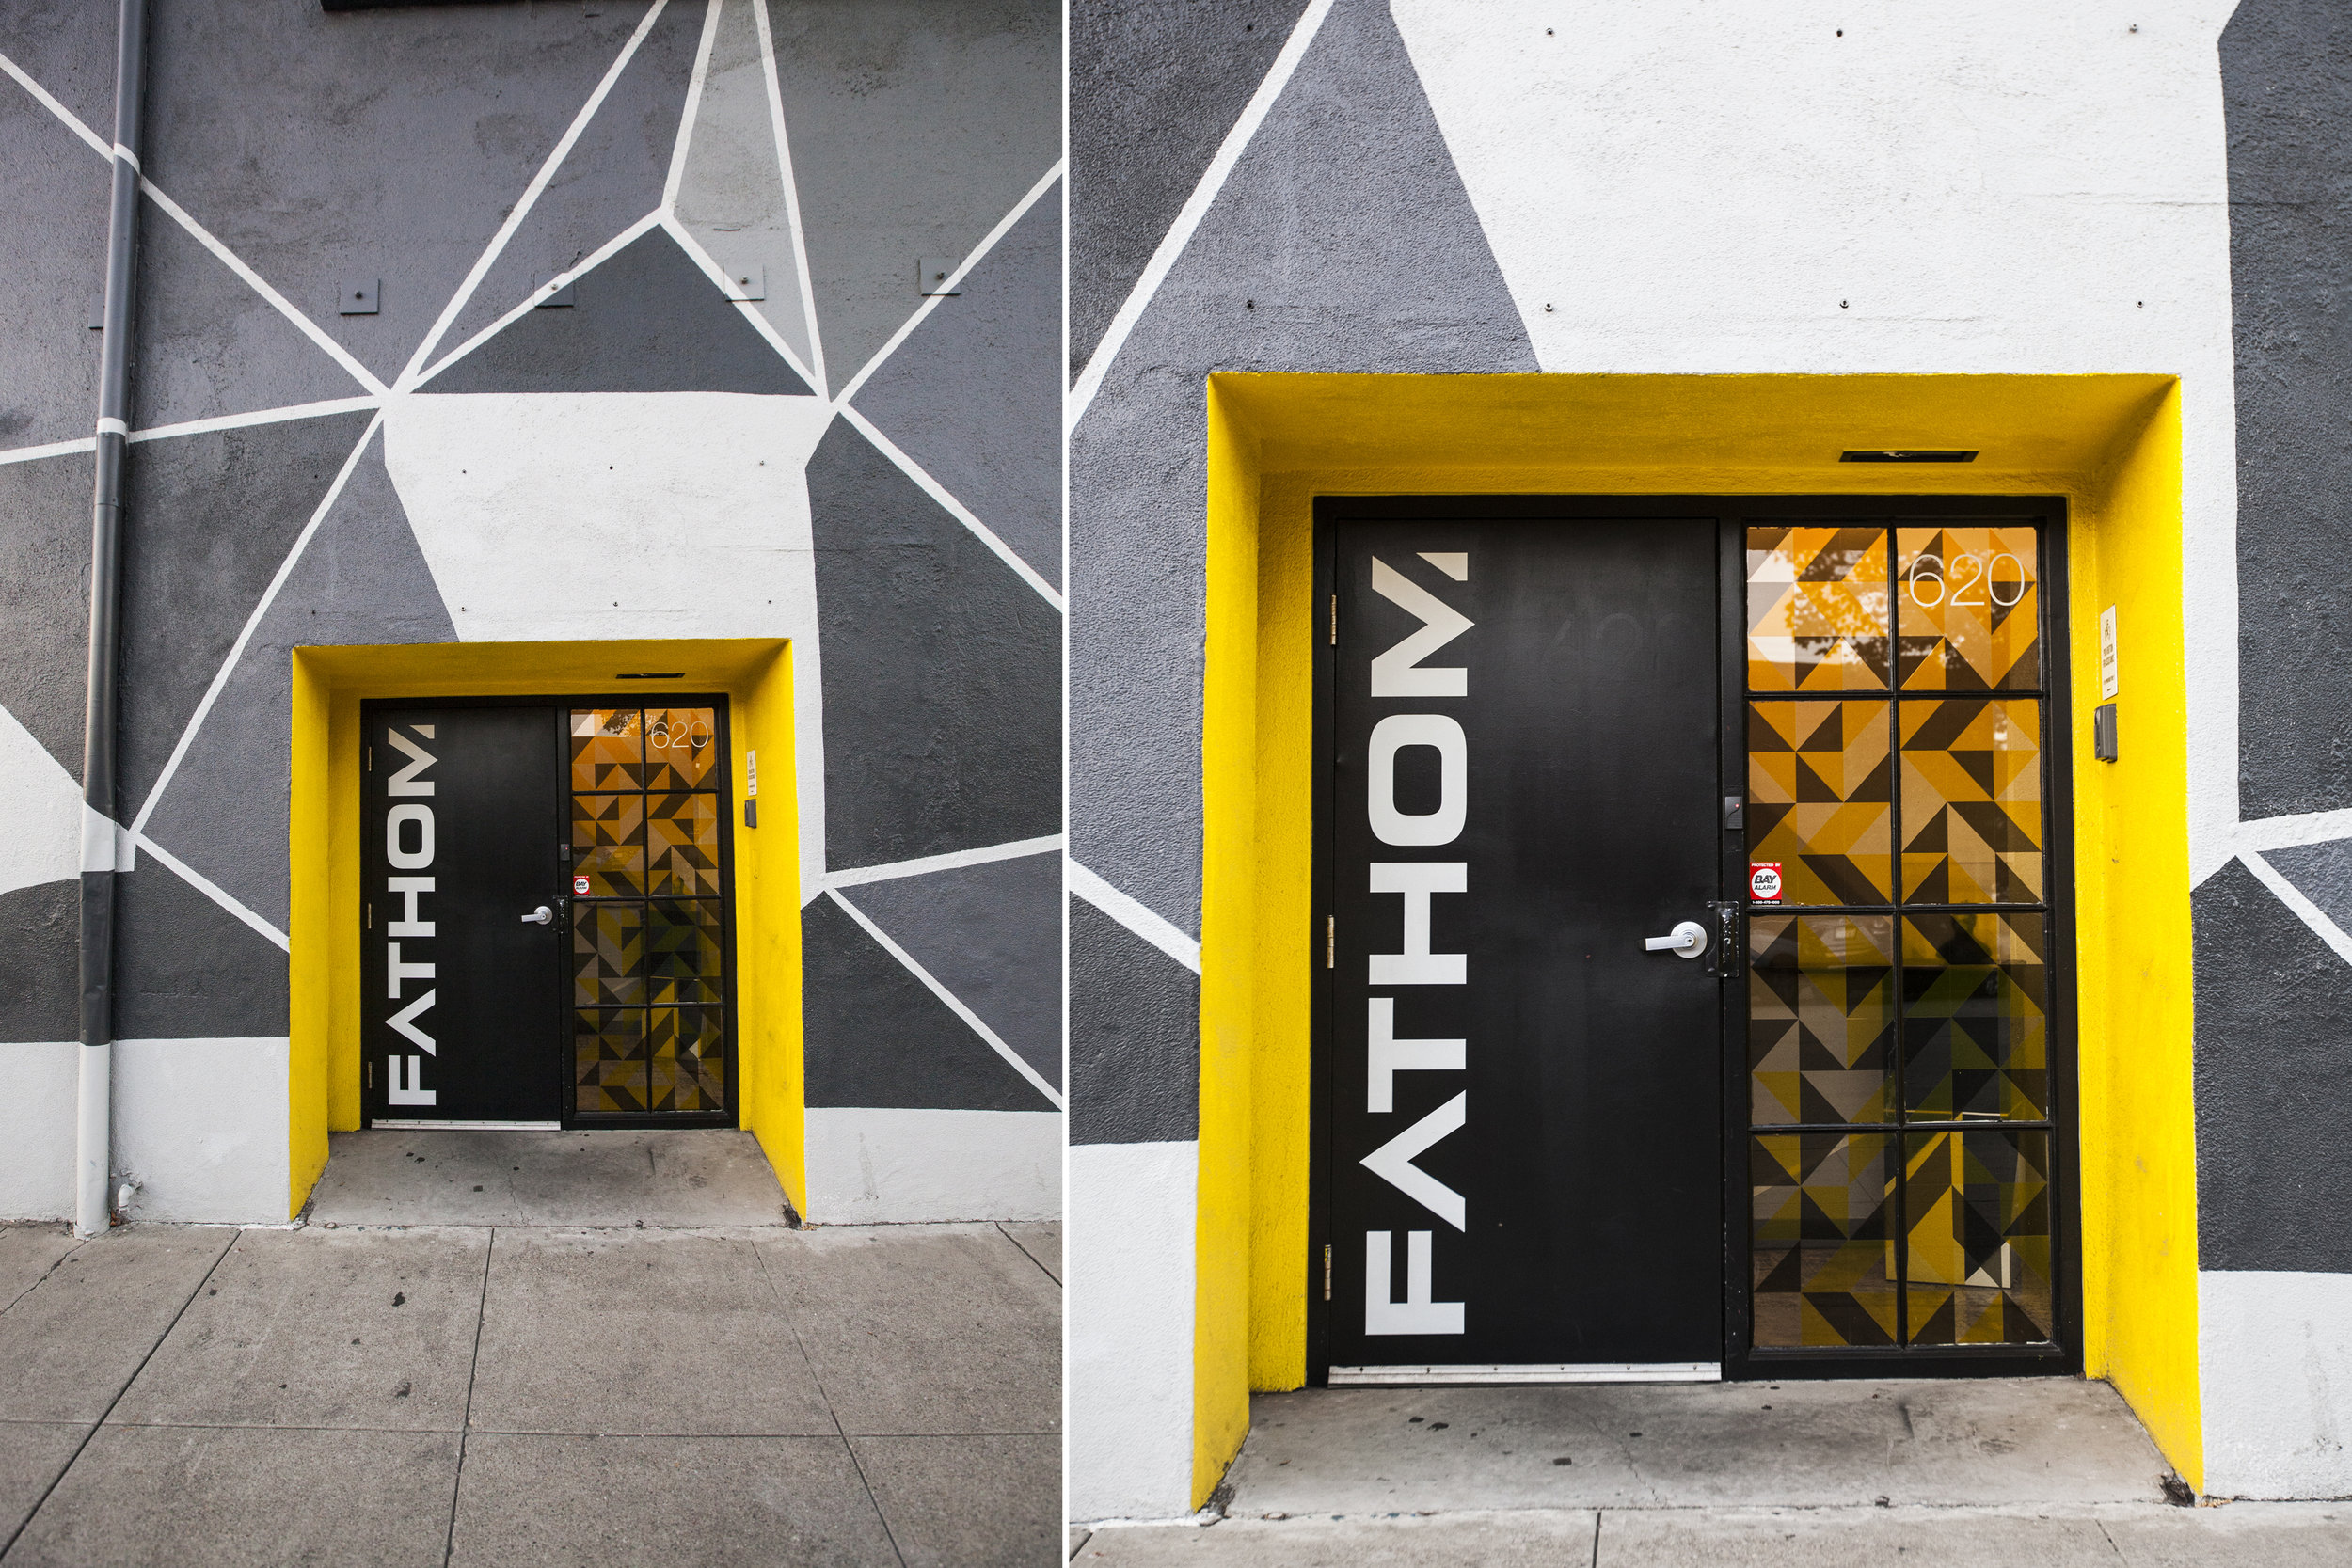  This bright yellow accent on the doorway helps with wayfinding and just looks really great. 